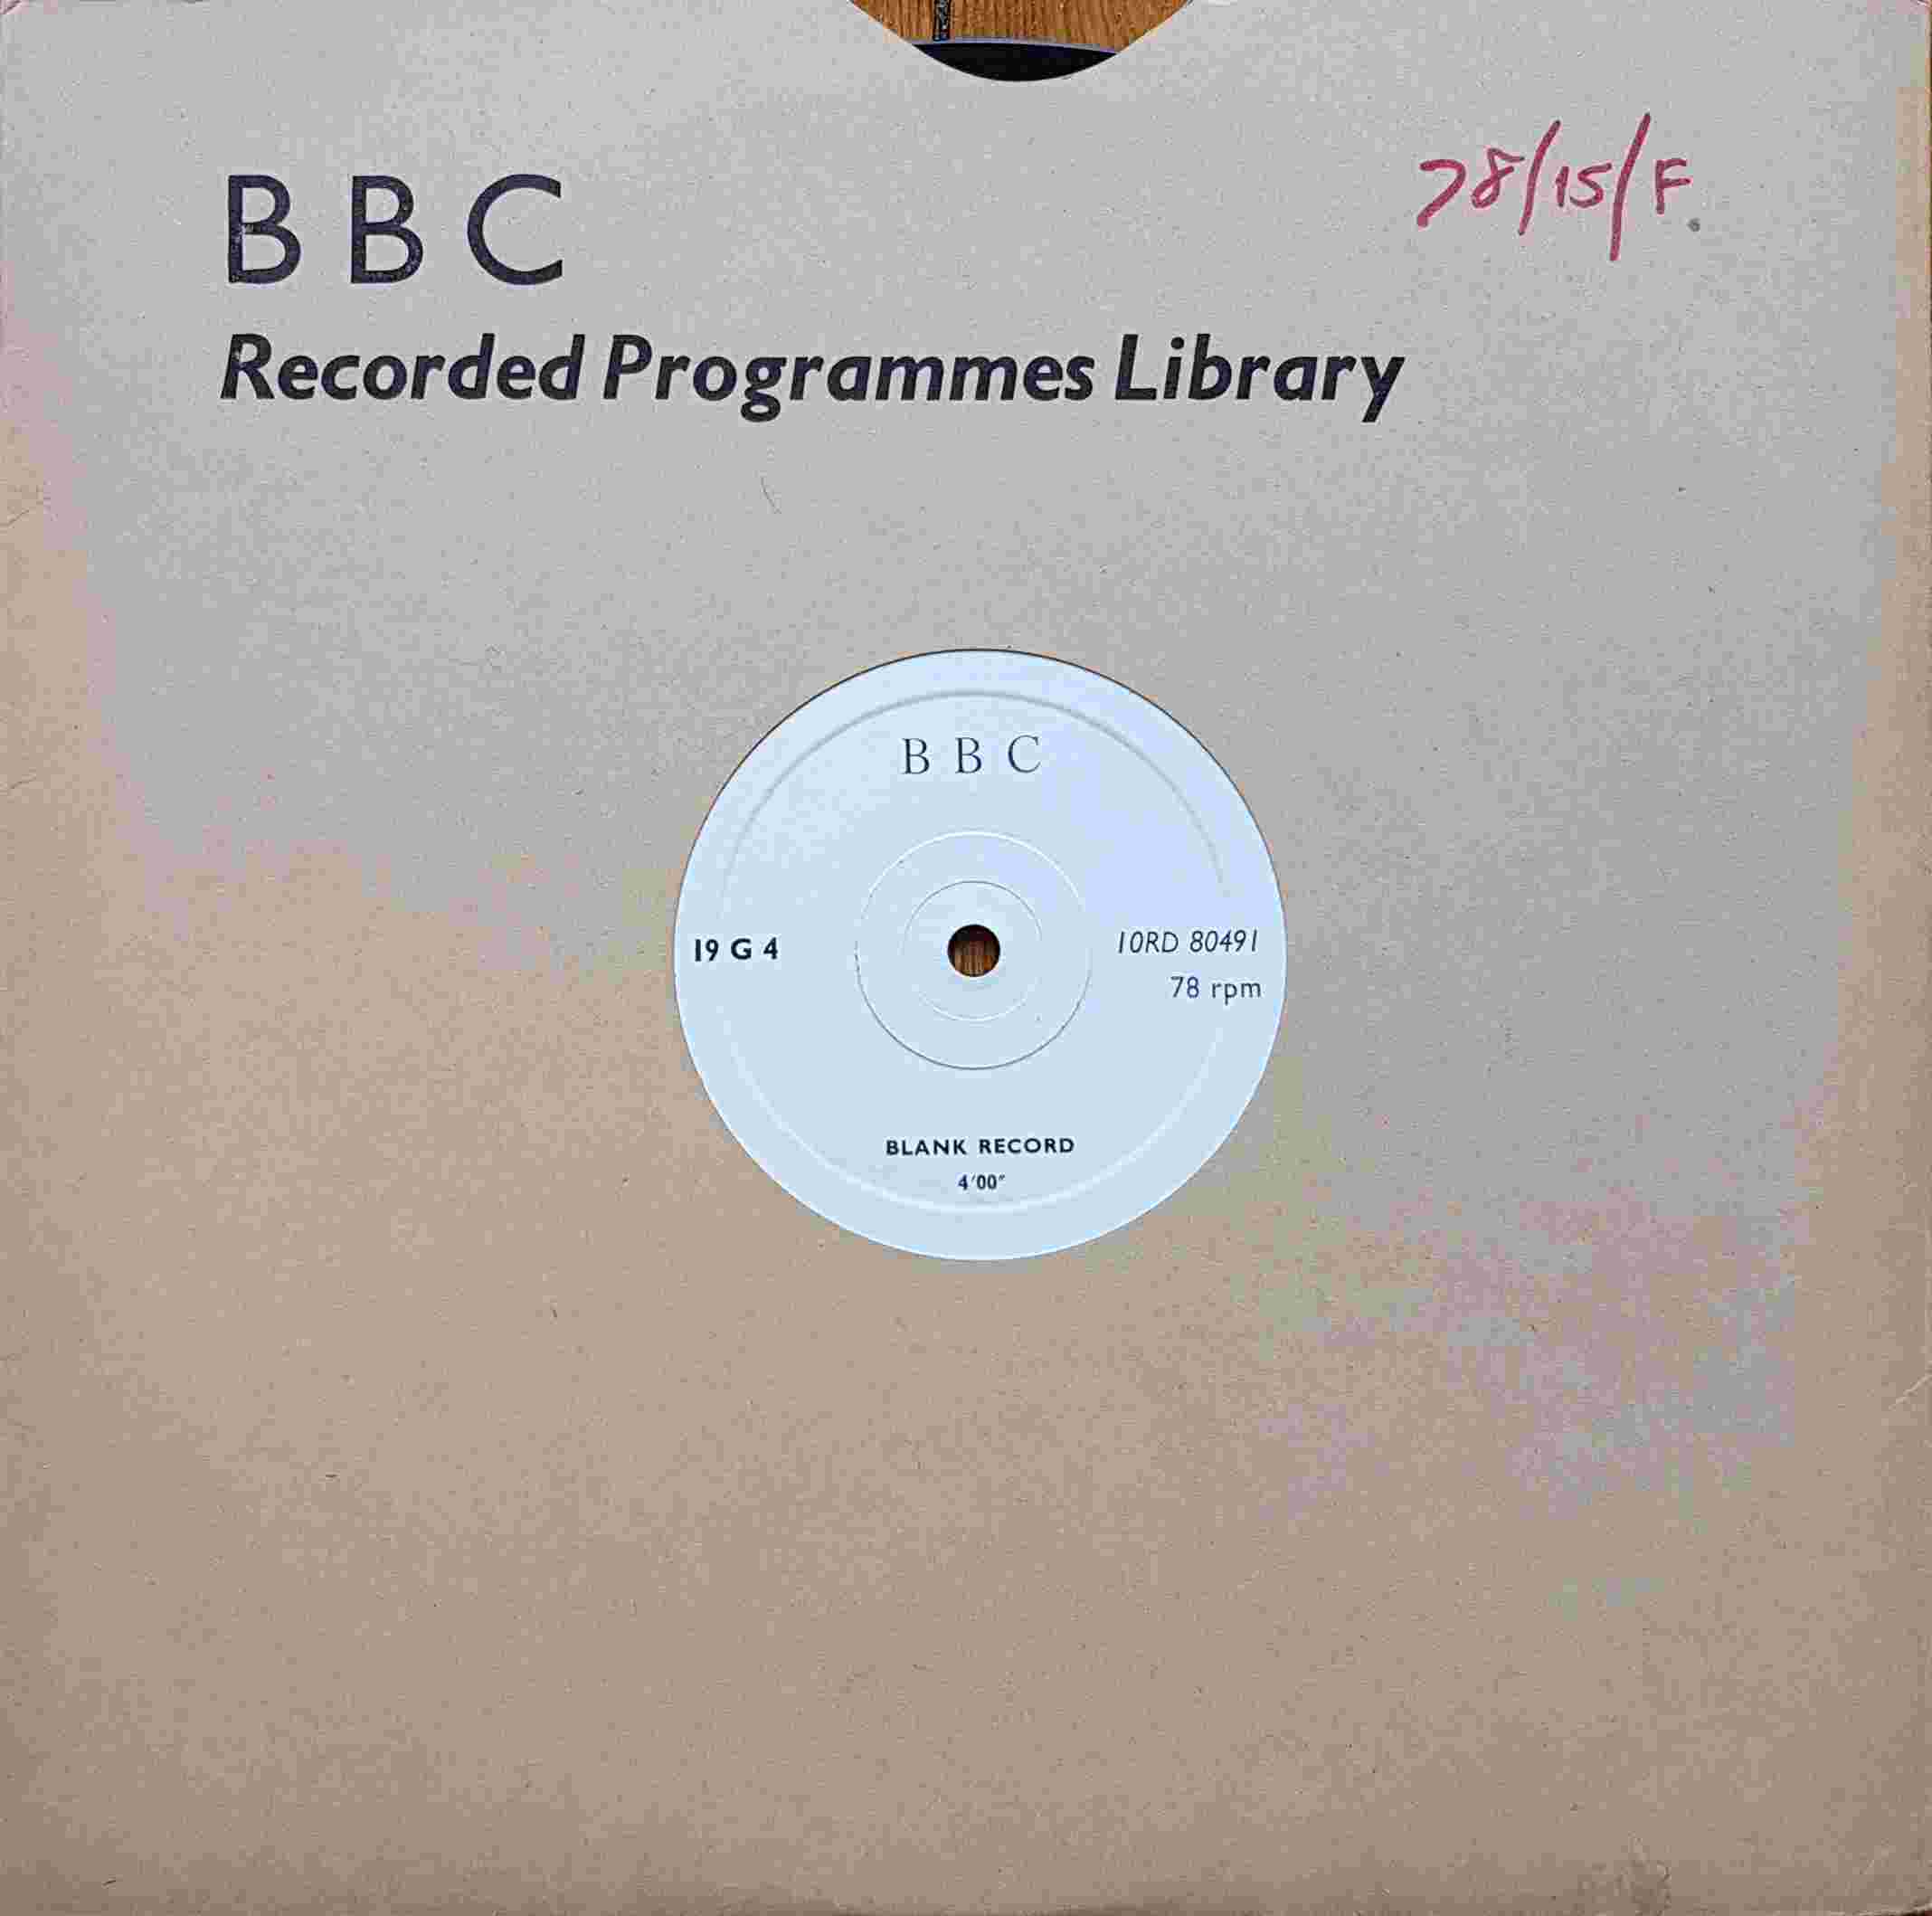 Picture of 19 G 4 Blank record by artist Not registered from the BBC records and Tapes library